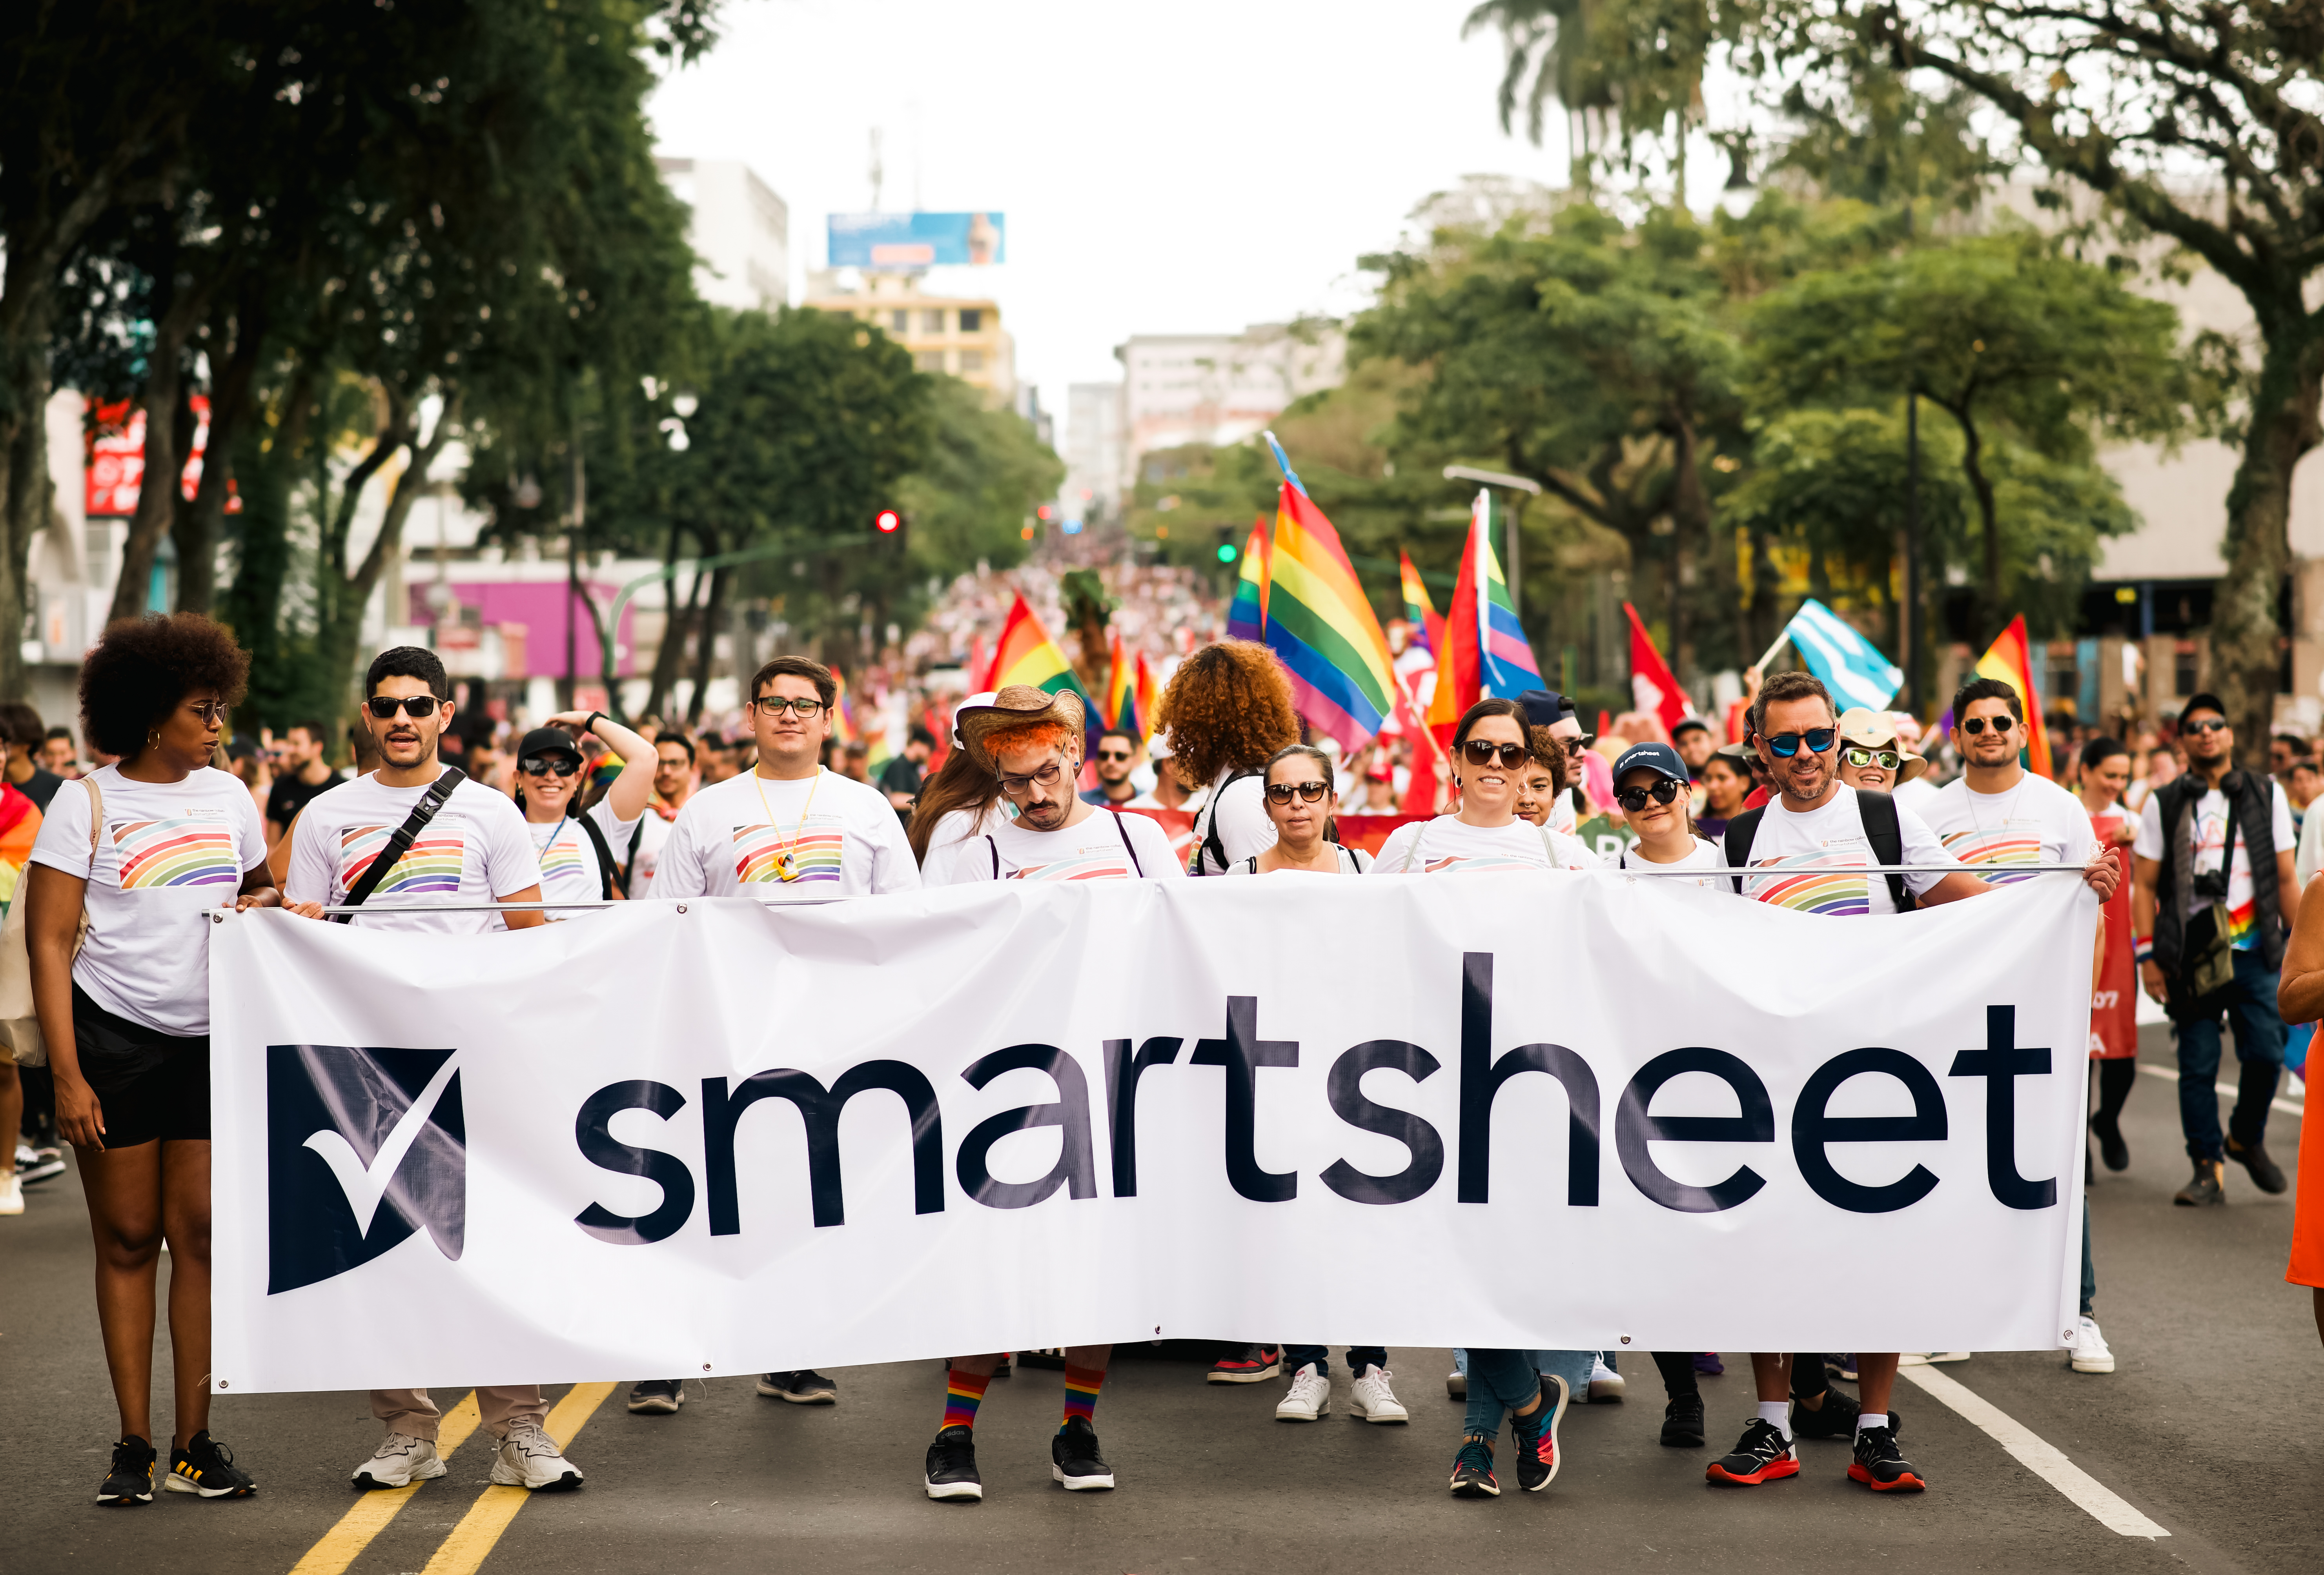 Group of people holding Smartsheet banner at a Pride Parade